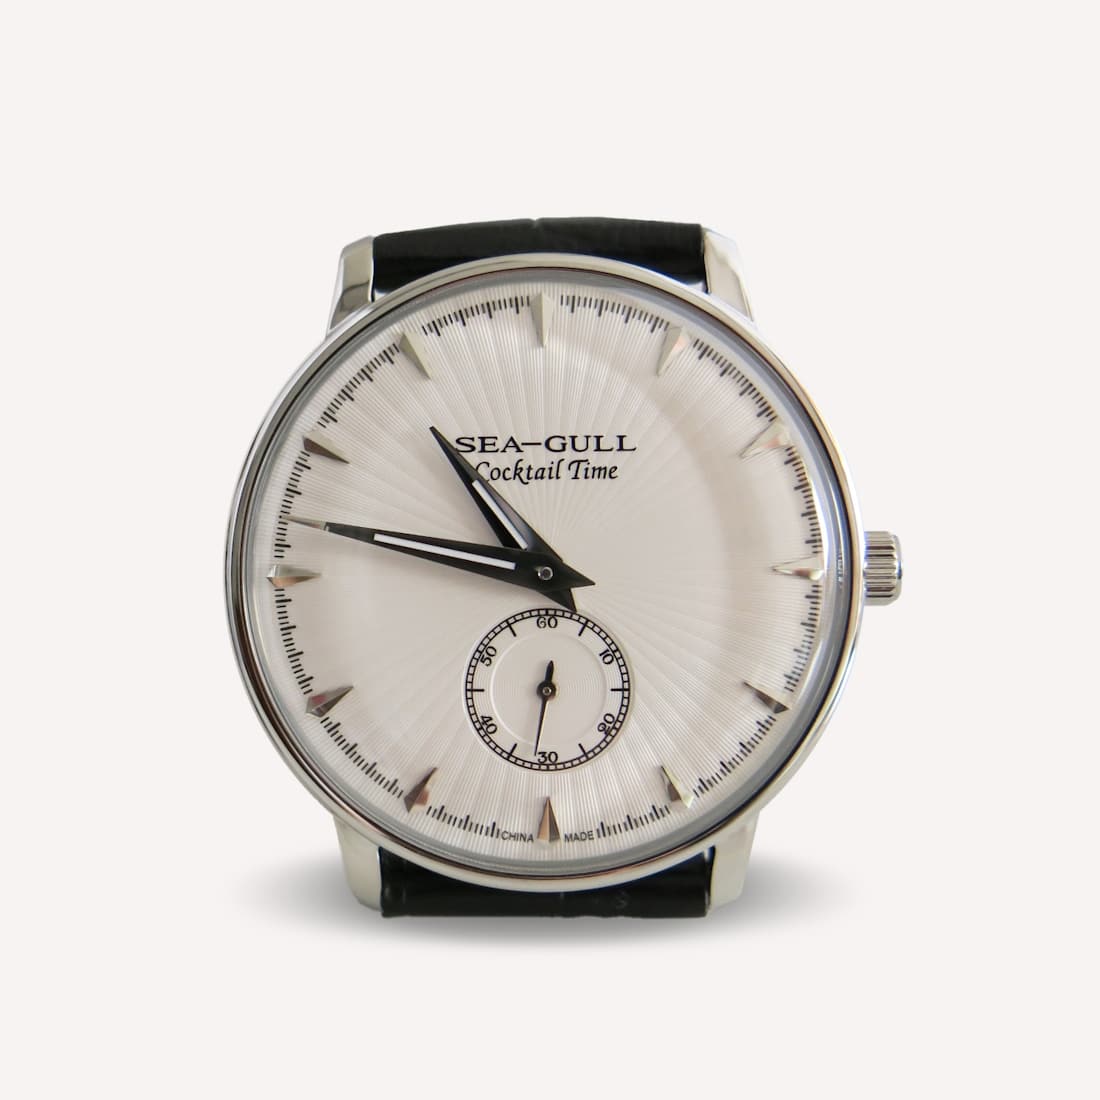 SeaGull 38mm Hand Wind Cocktail Time Dress Watch